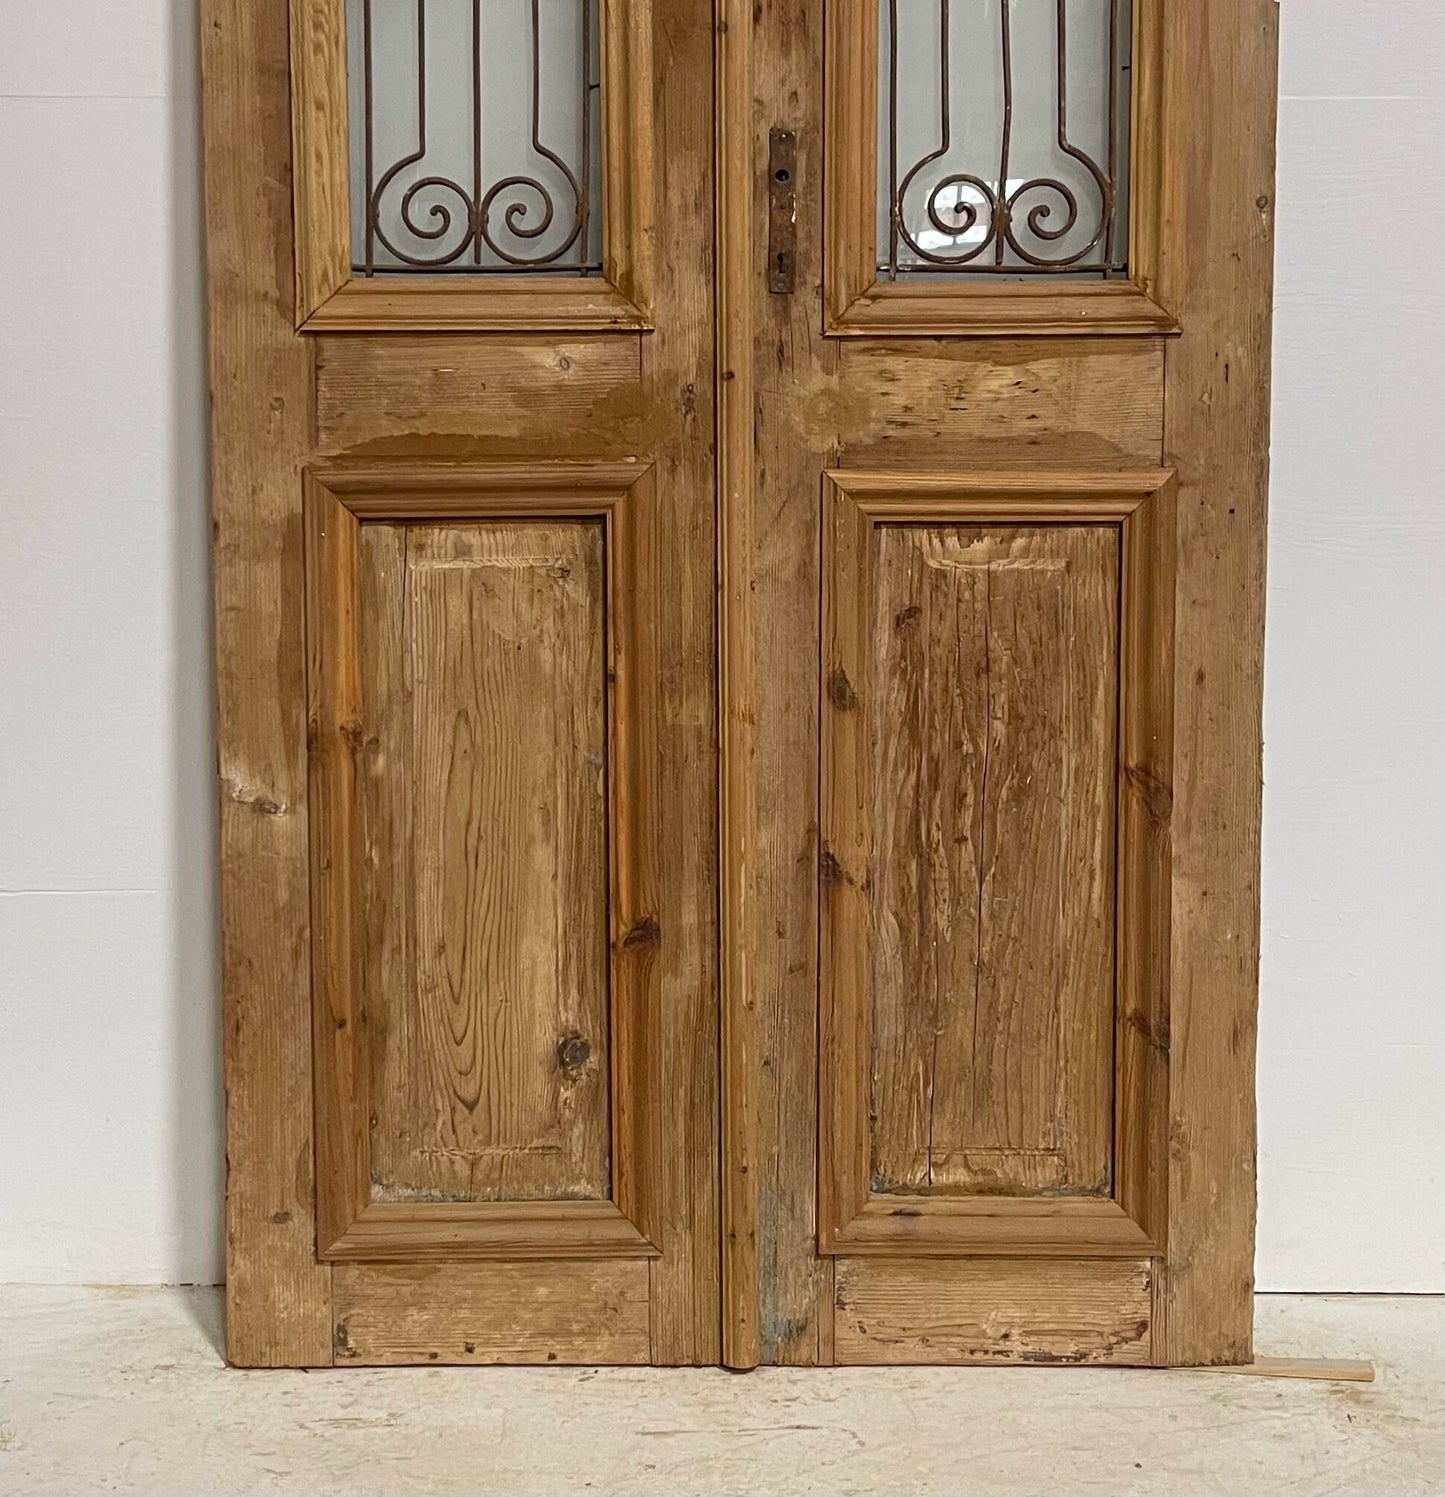 Antique French doors (86.75X39.5) with metal G0001